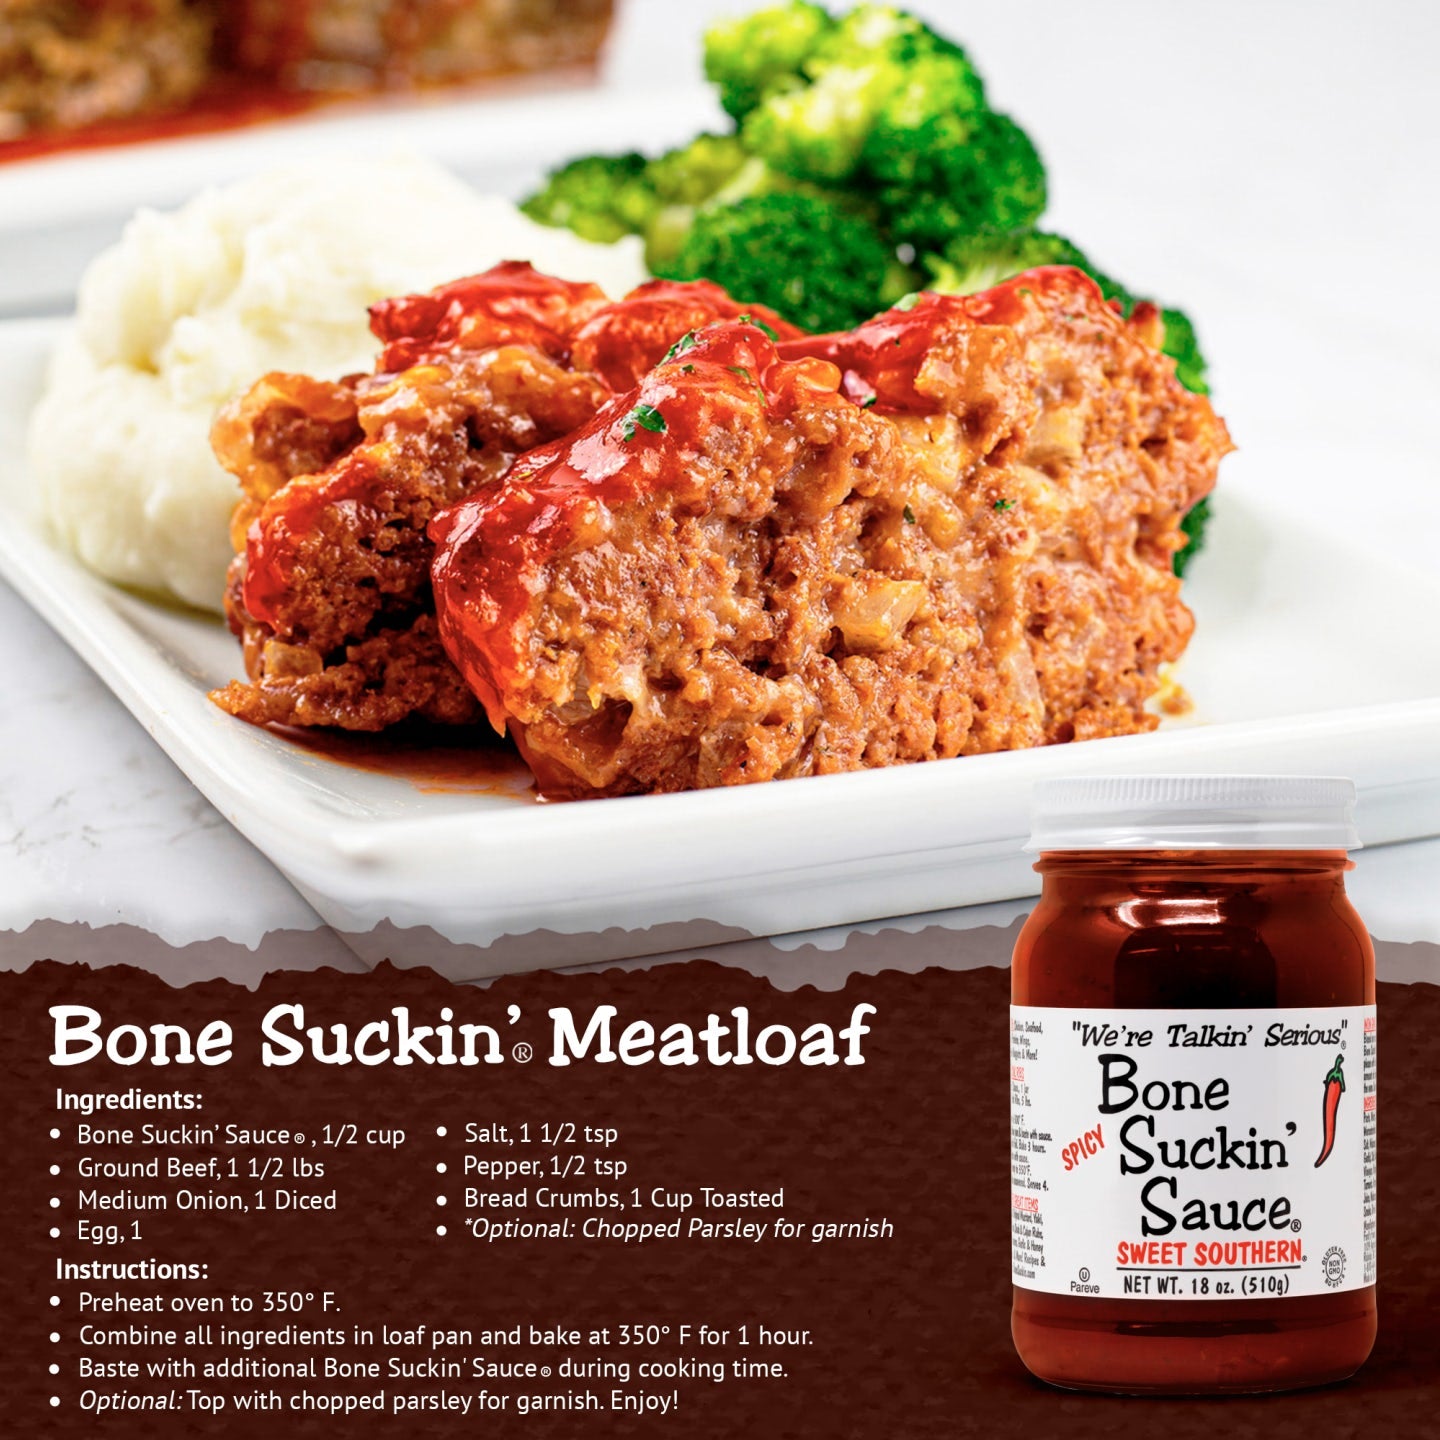 Bone Suckin' Meatloaf recipe. Ingredients: Bone Suckin' Sauce, 1/2 cup, Ground beef, 1 1/2 lbs, Medium onion, diced, Egg, 1, Salt 1 1/2 tsp, Pepper, 1/2 tsp, Bread Crumbs, 1 cup toasted Optional, chopped parsley for garnish. Instructions: Preheat oven to 350°F. Combine all ingredients in loaf pan and bake for 1 hour. Baste with additional Bone Suckin' Sauce during cooking time. Optional: Top with chopped parsley for garnish. Enjoy!